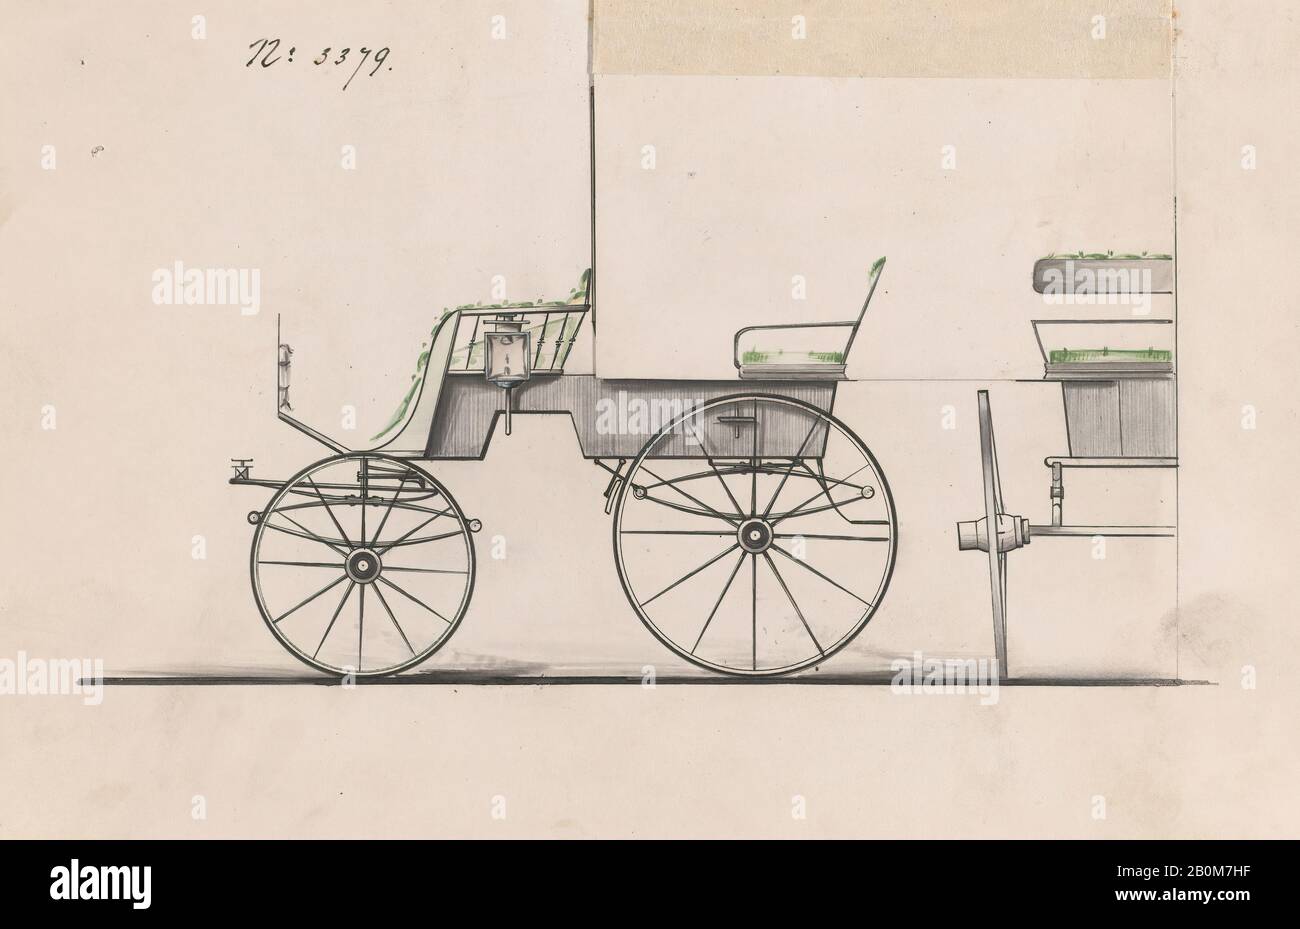 Brewster & Co., Design for T-Cart, no. 3379, Brewster & Co. (American, New York), 1877, Pen and black ink, Sheet: 6 1/4 × 9 1/4 in. (15.9 × 23.5 cm), Drawings Stock Photo